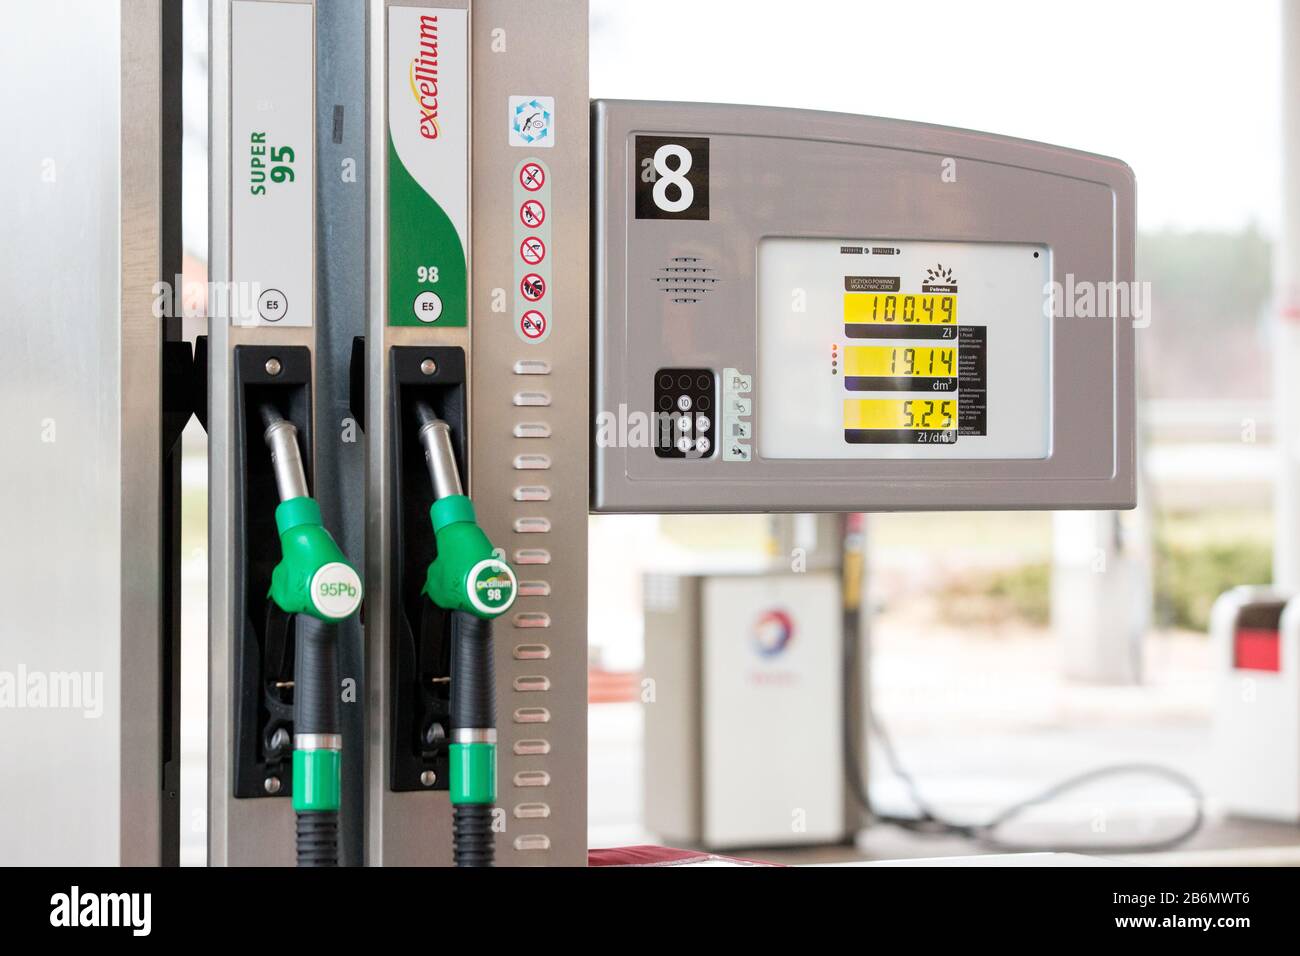 Fuel dispensers at the Total petrol station. Stock Photo